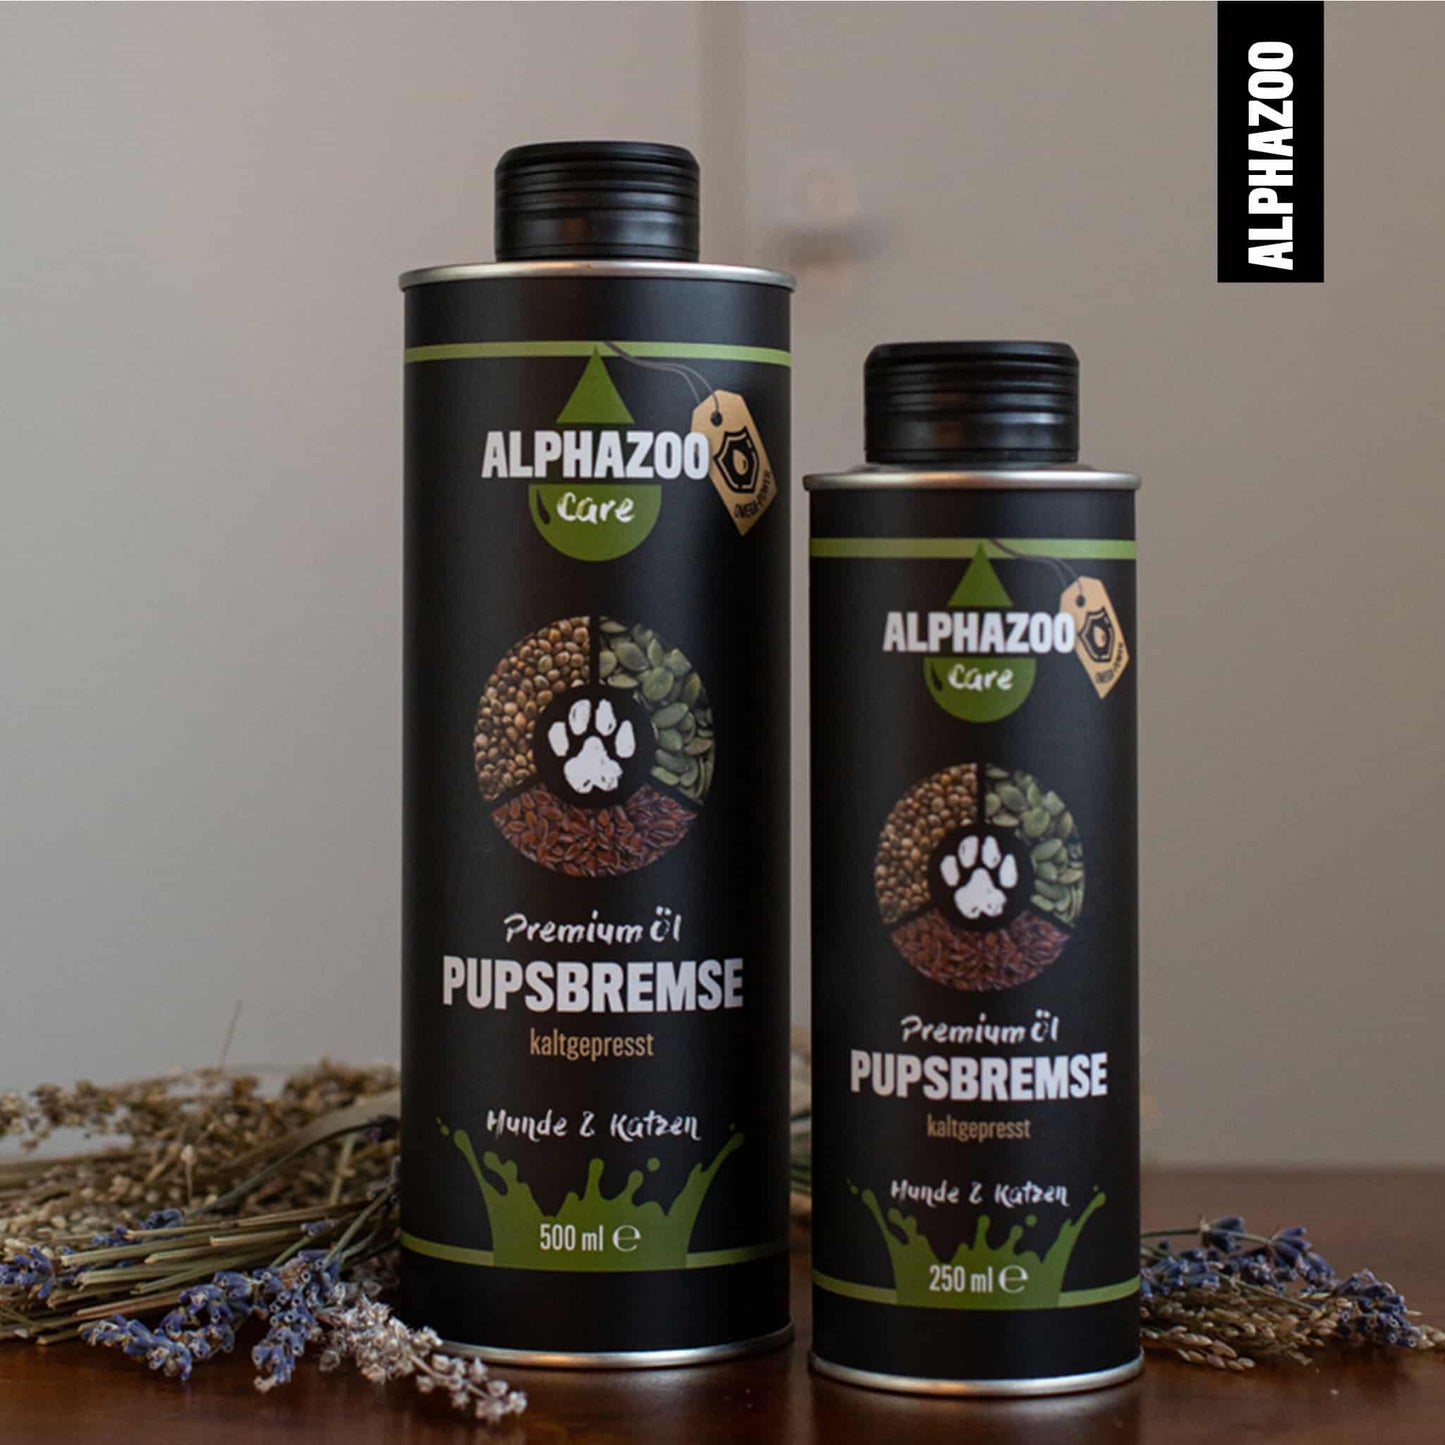 Pupsbremse food oil for dogs & cats I Gastrointestinal & digestion